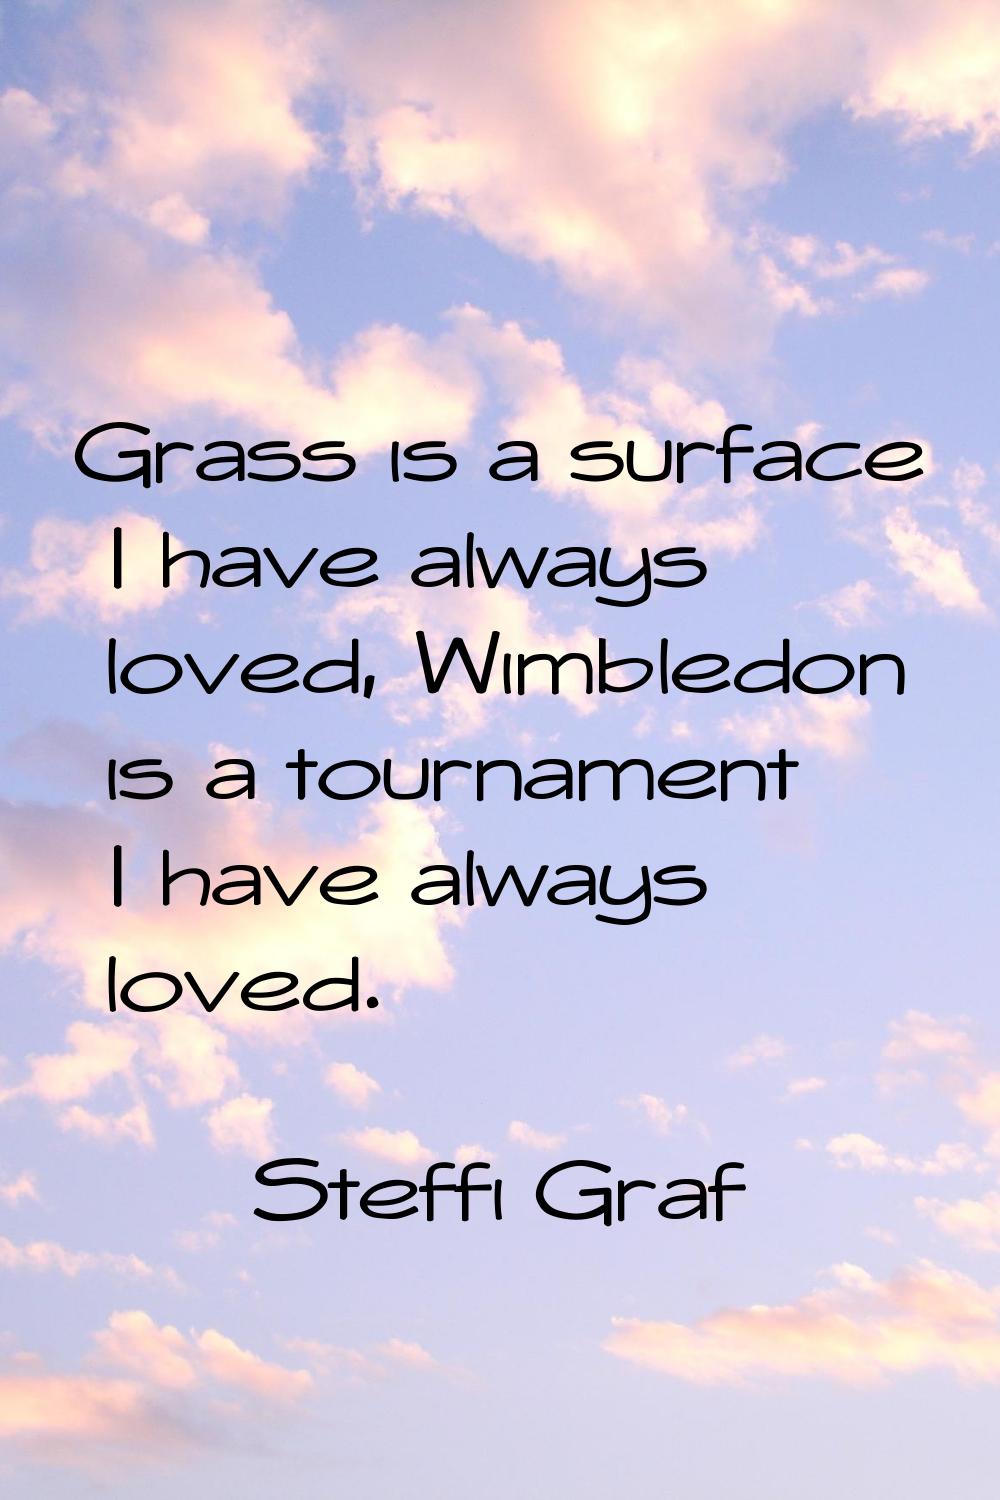 Grass is a surface I have always loved, Wimbledon is a tournament I have always loved.